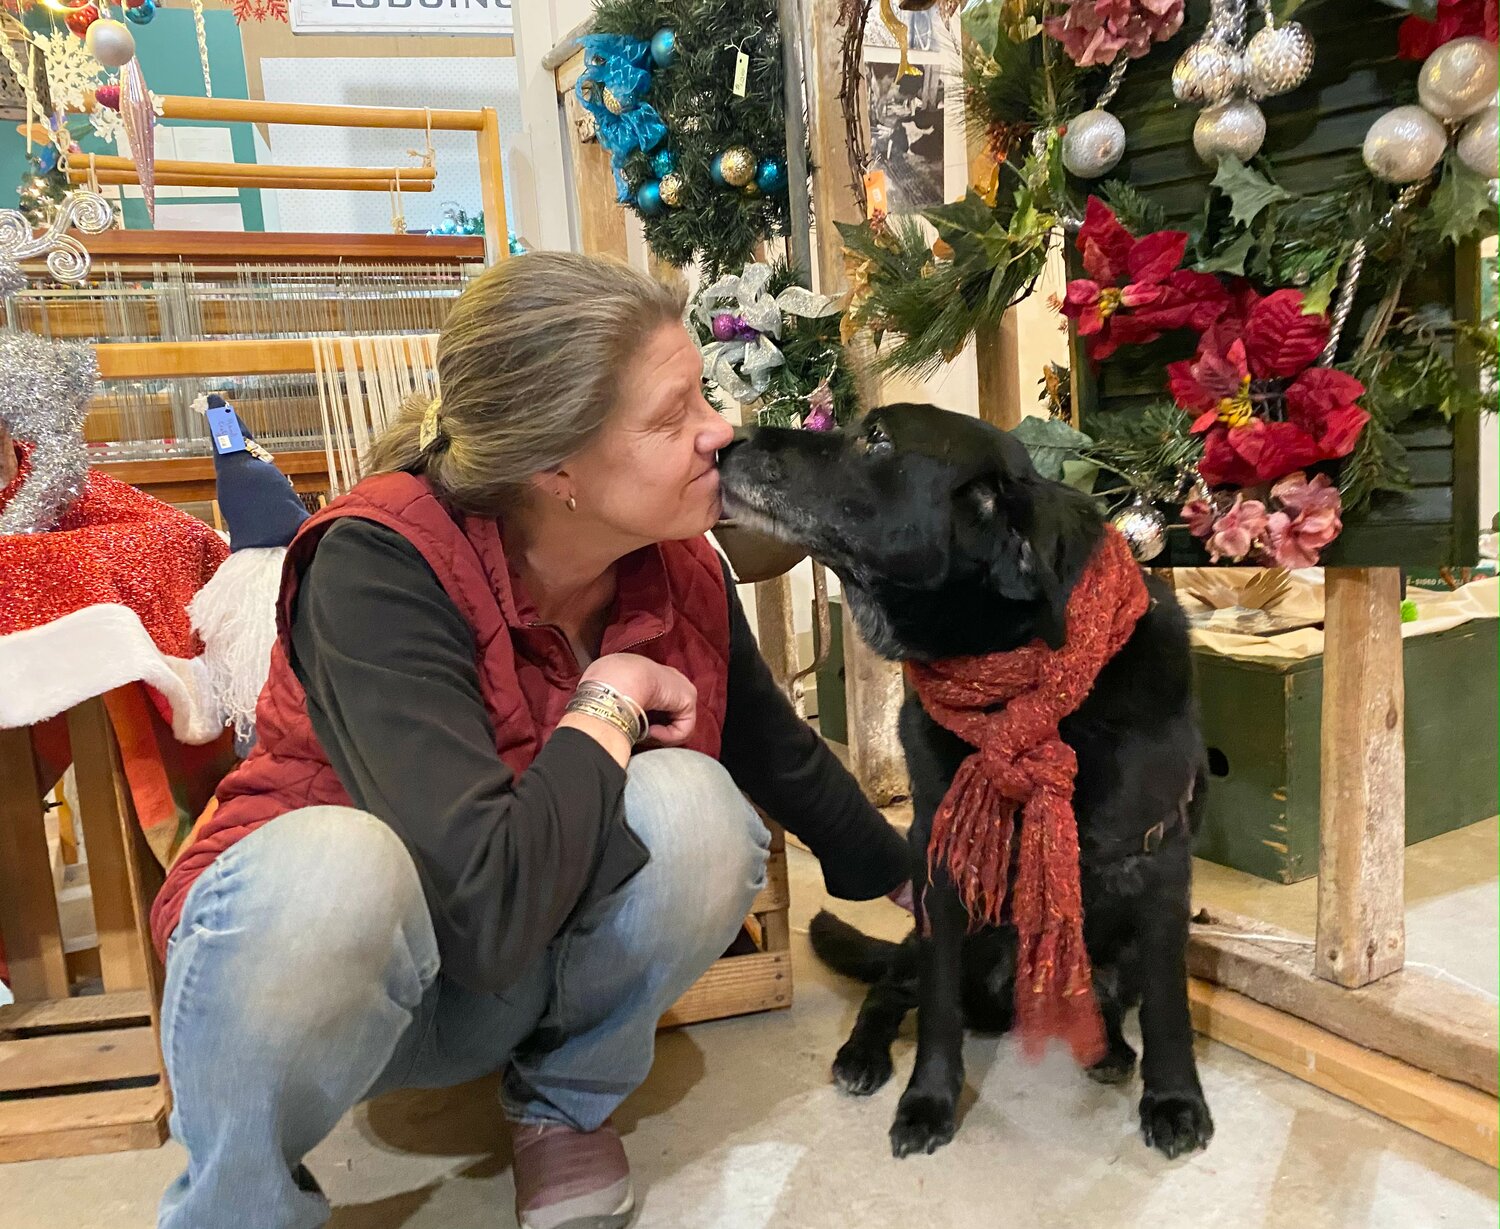 Tempe, an 11-year old Labrador Retriever mix breed, was adopted from the shelter by Heart of the Catskills Director Deb Crute 10 years ago. There are many dogs and cats available for adoption, Crute said.